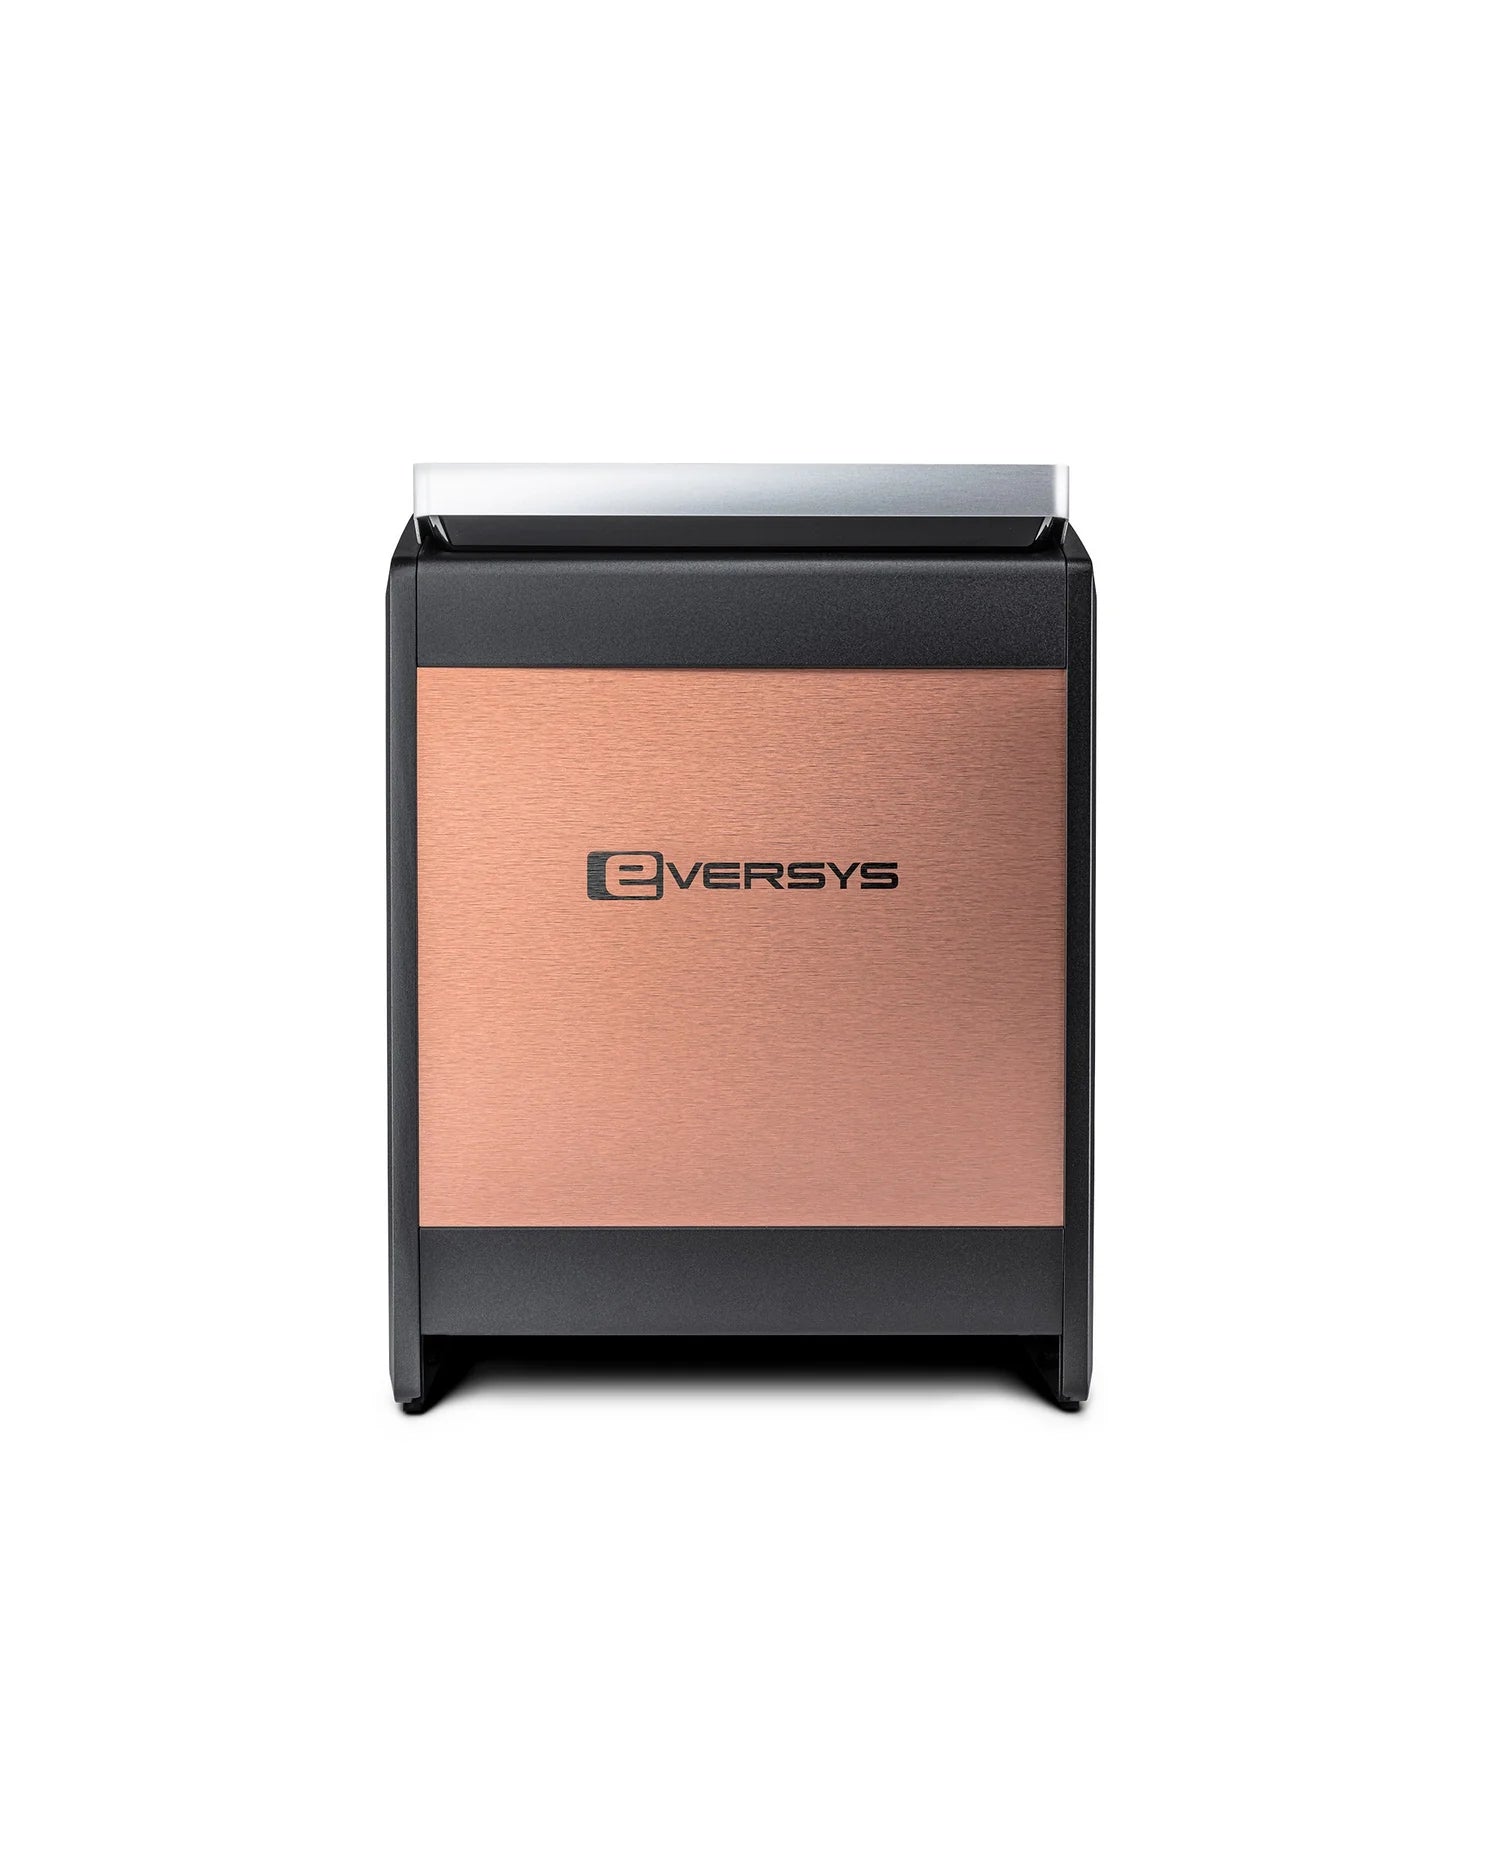 EVERSYS - CAMEO CLASSIC C' 2MS